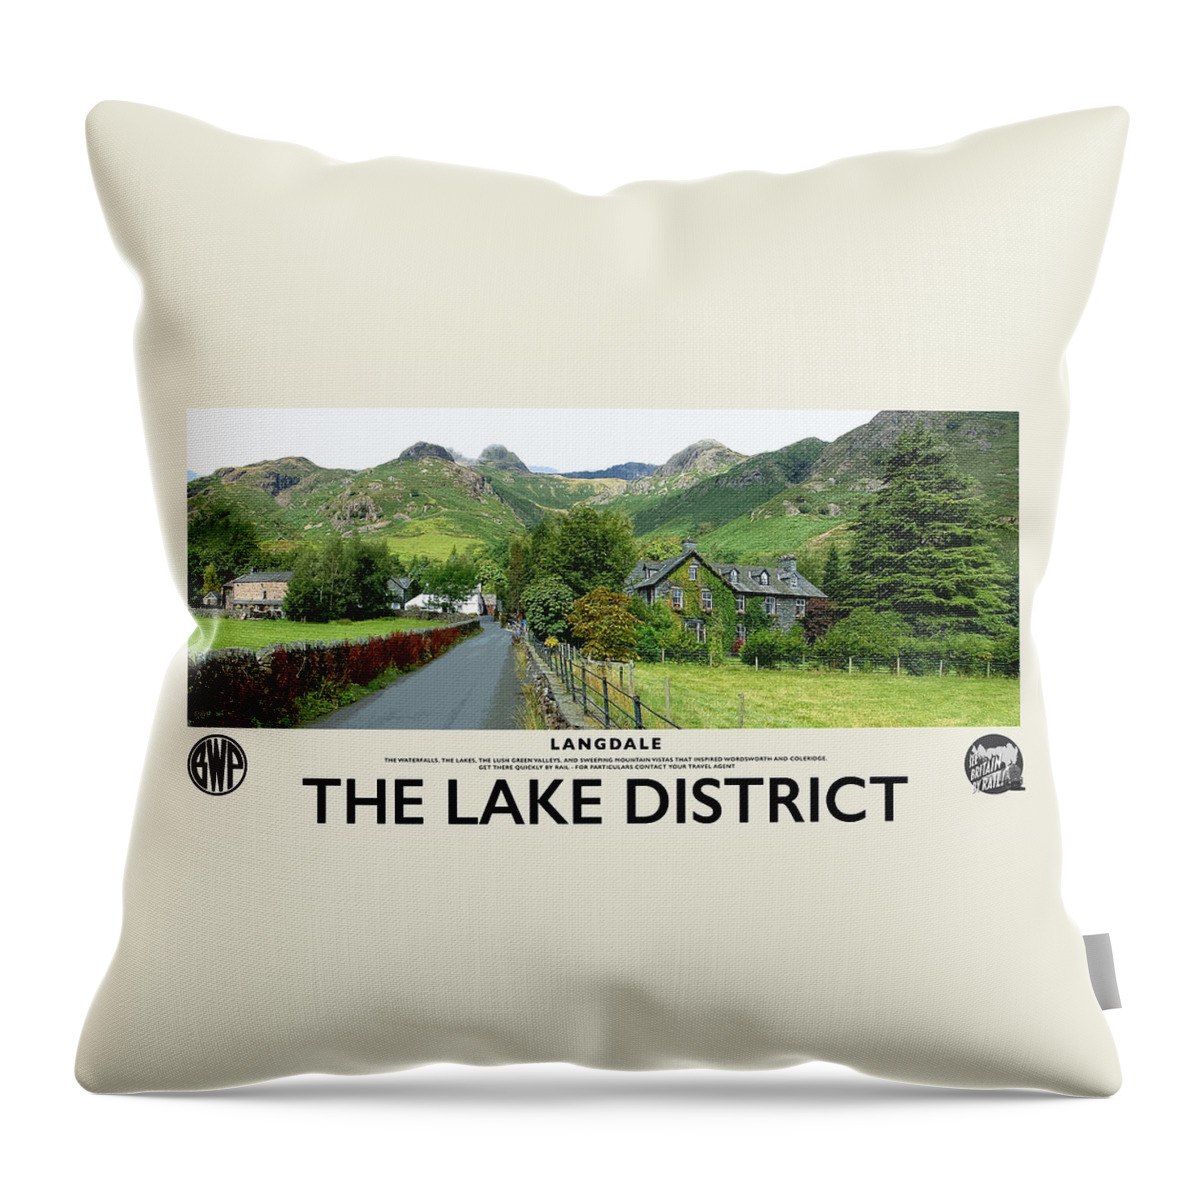 Langdale Throw Pillow featuring the photograph Langdale Lake District Destination Cream Railway Poster by Brian Watt